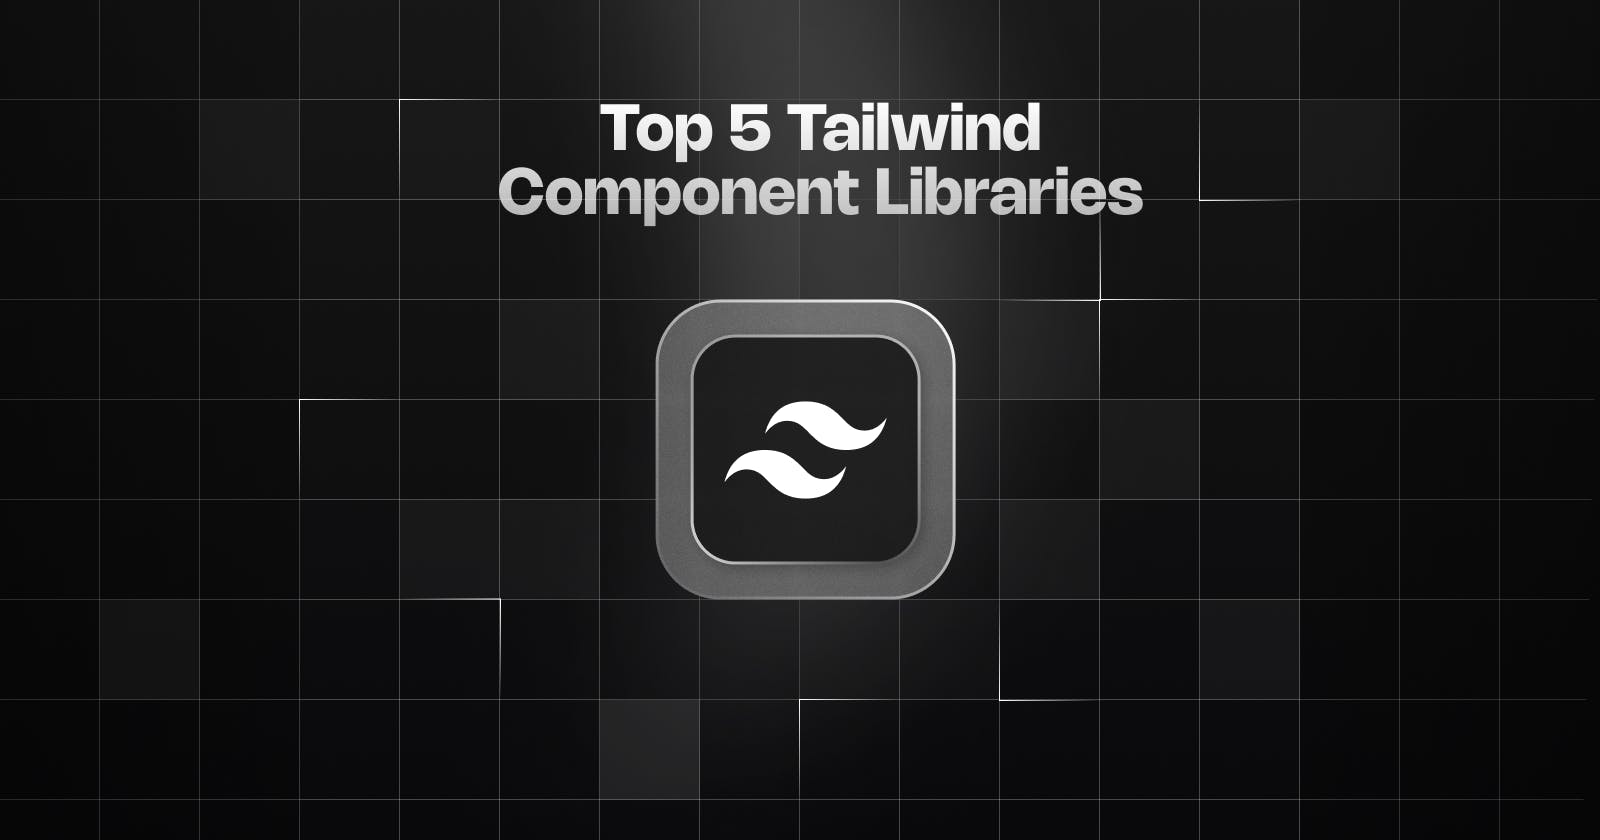 Top 5 Tailwind Component Libraries